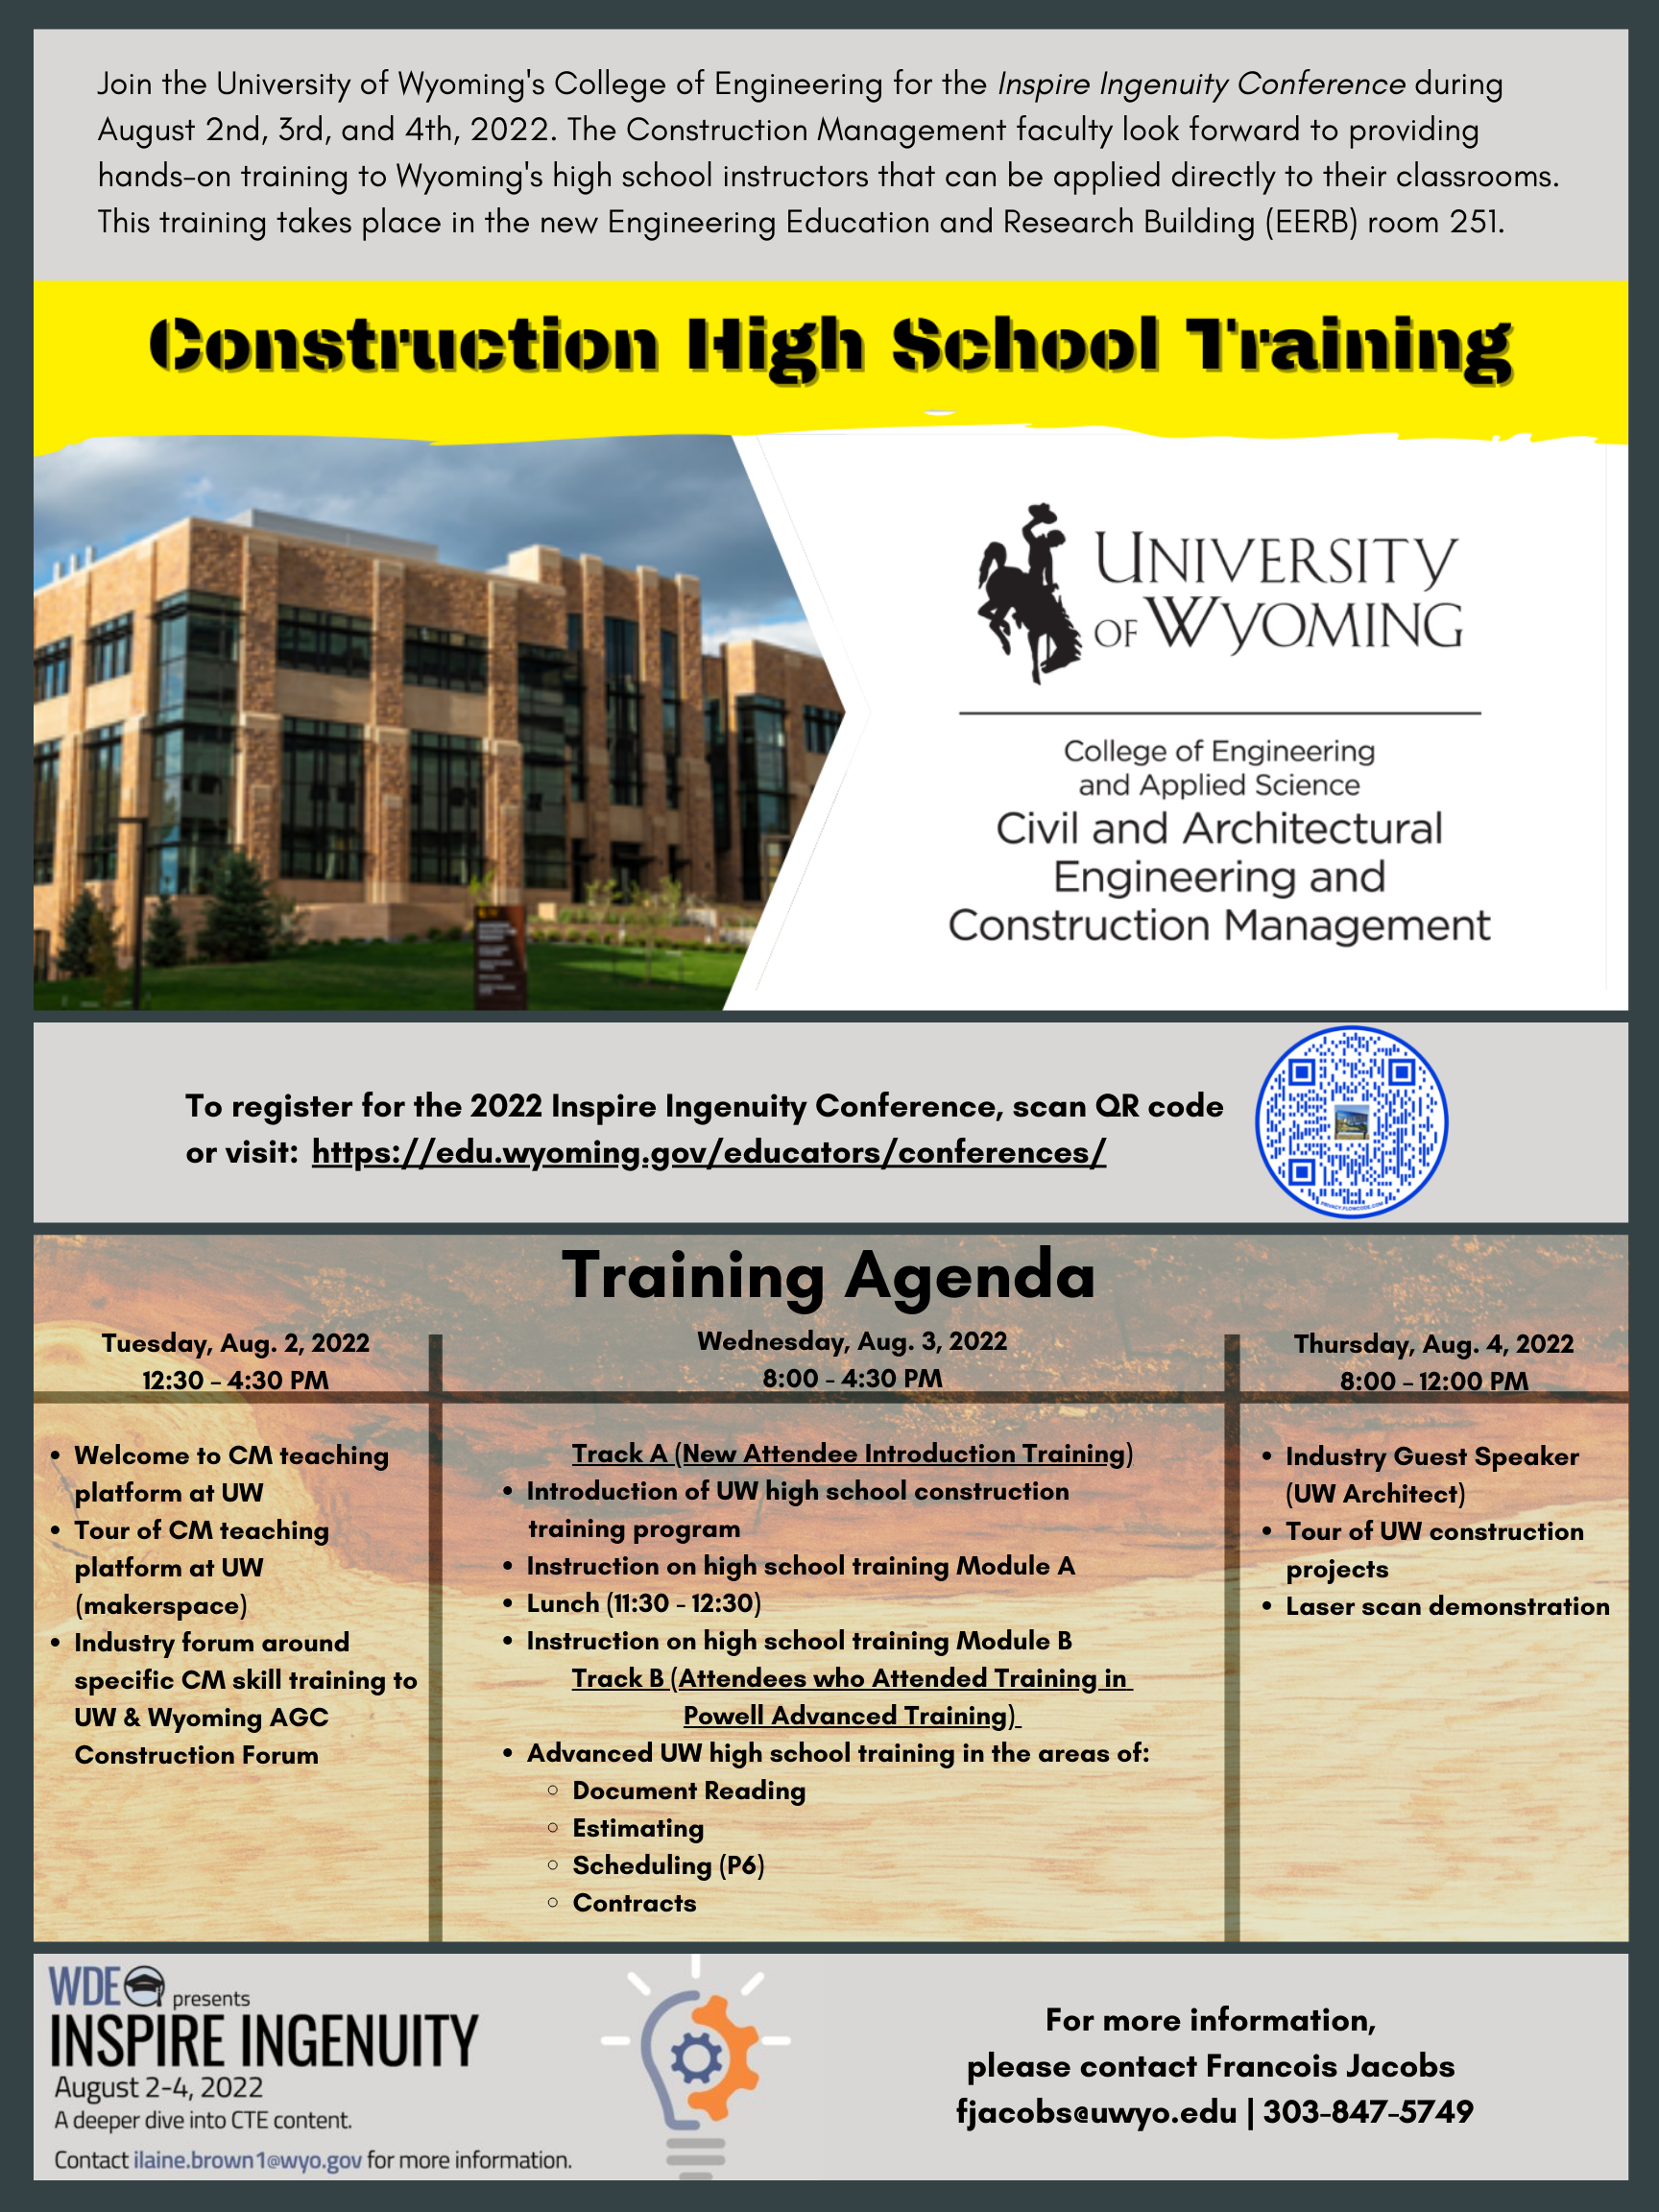 hs-training-uw-inspire: Join the University of Wyoming's College of Engineering for the Inspire Ingenuity Conference during August 2nd, 3rd, and 4th, 2022. The Construction Management faculty look forward to providing hands-on training to Wyoming's high school instructors that can be applied directly to their classrooms. This training takes place in the new Engineering Education and Research Building (EERB) room 251.